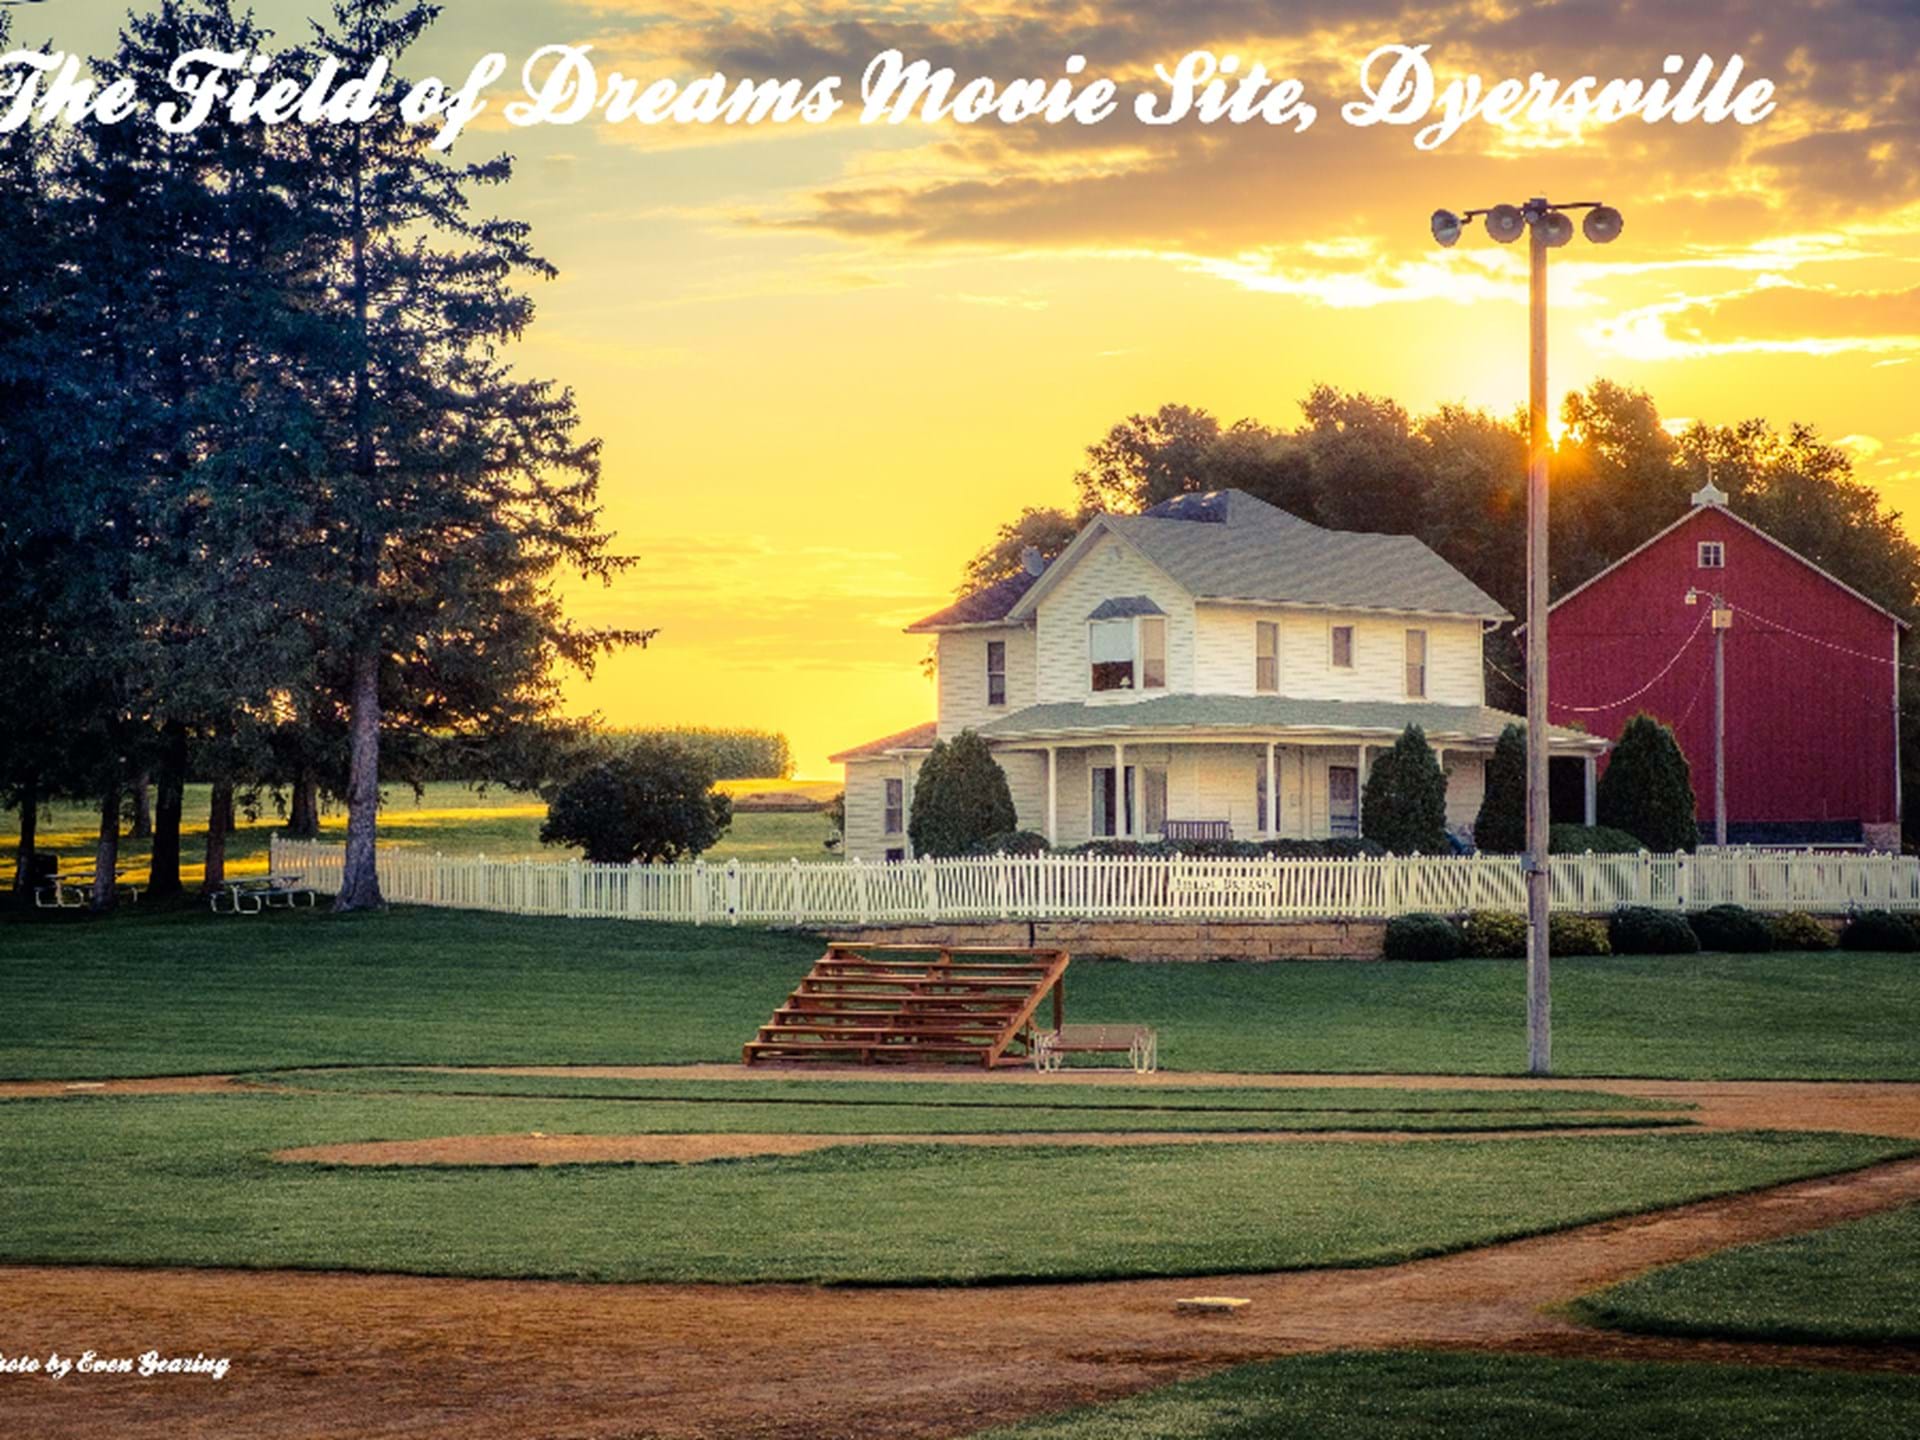 Field of Dreams Movie Site by Even Gearing